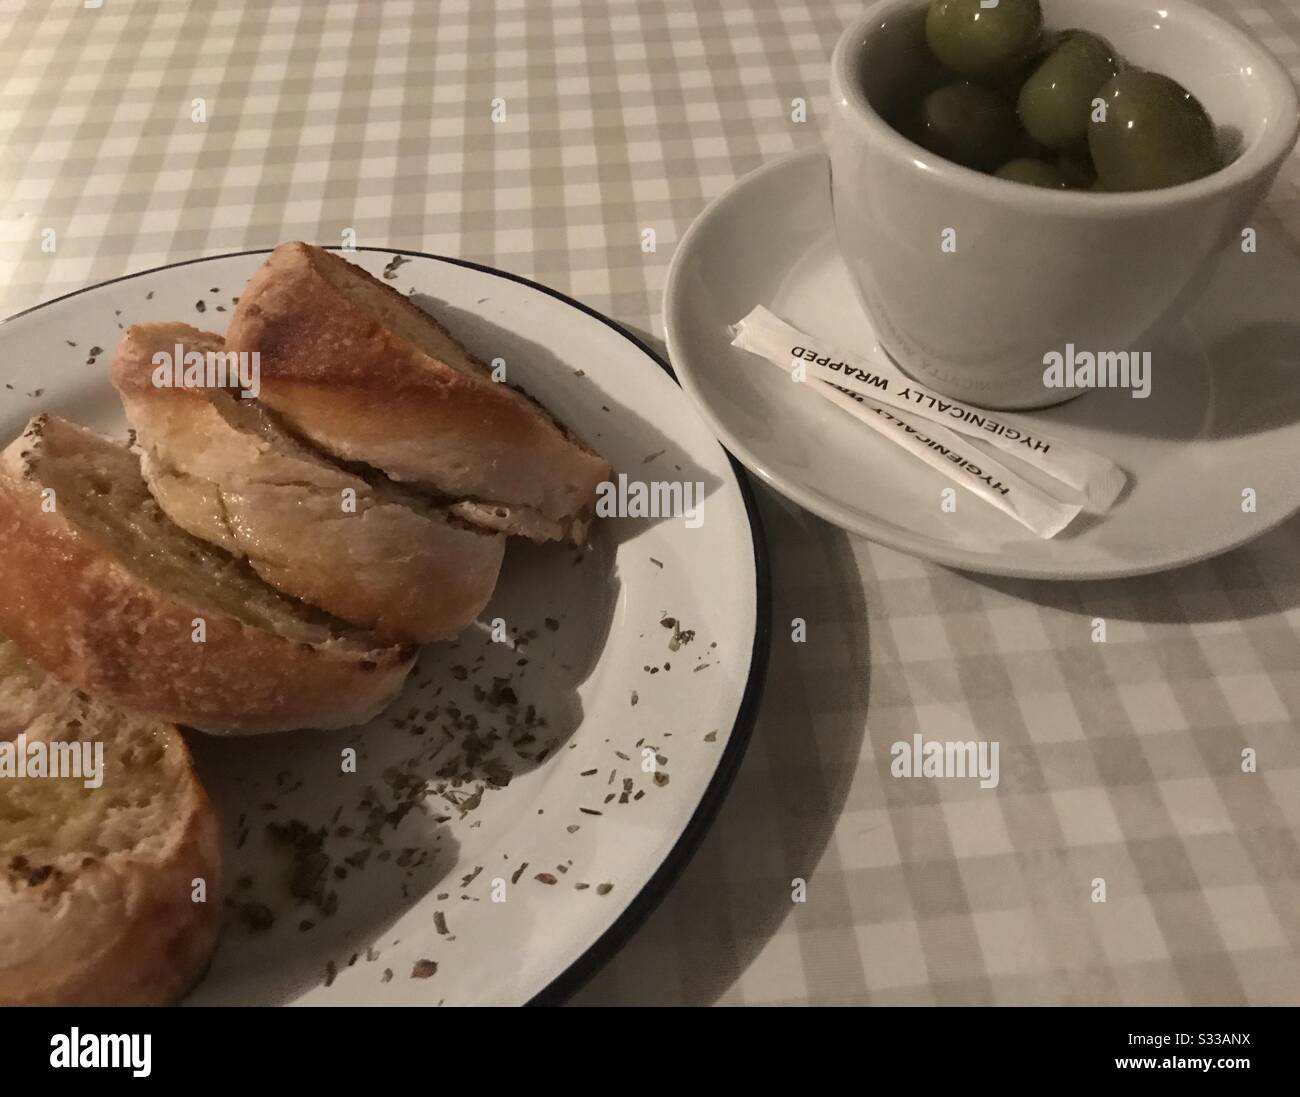 Garlic bread and olives. Stock Photo